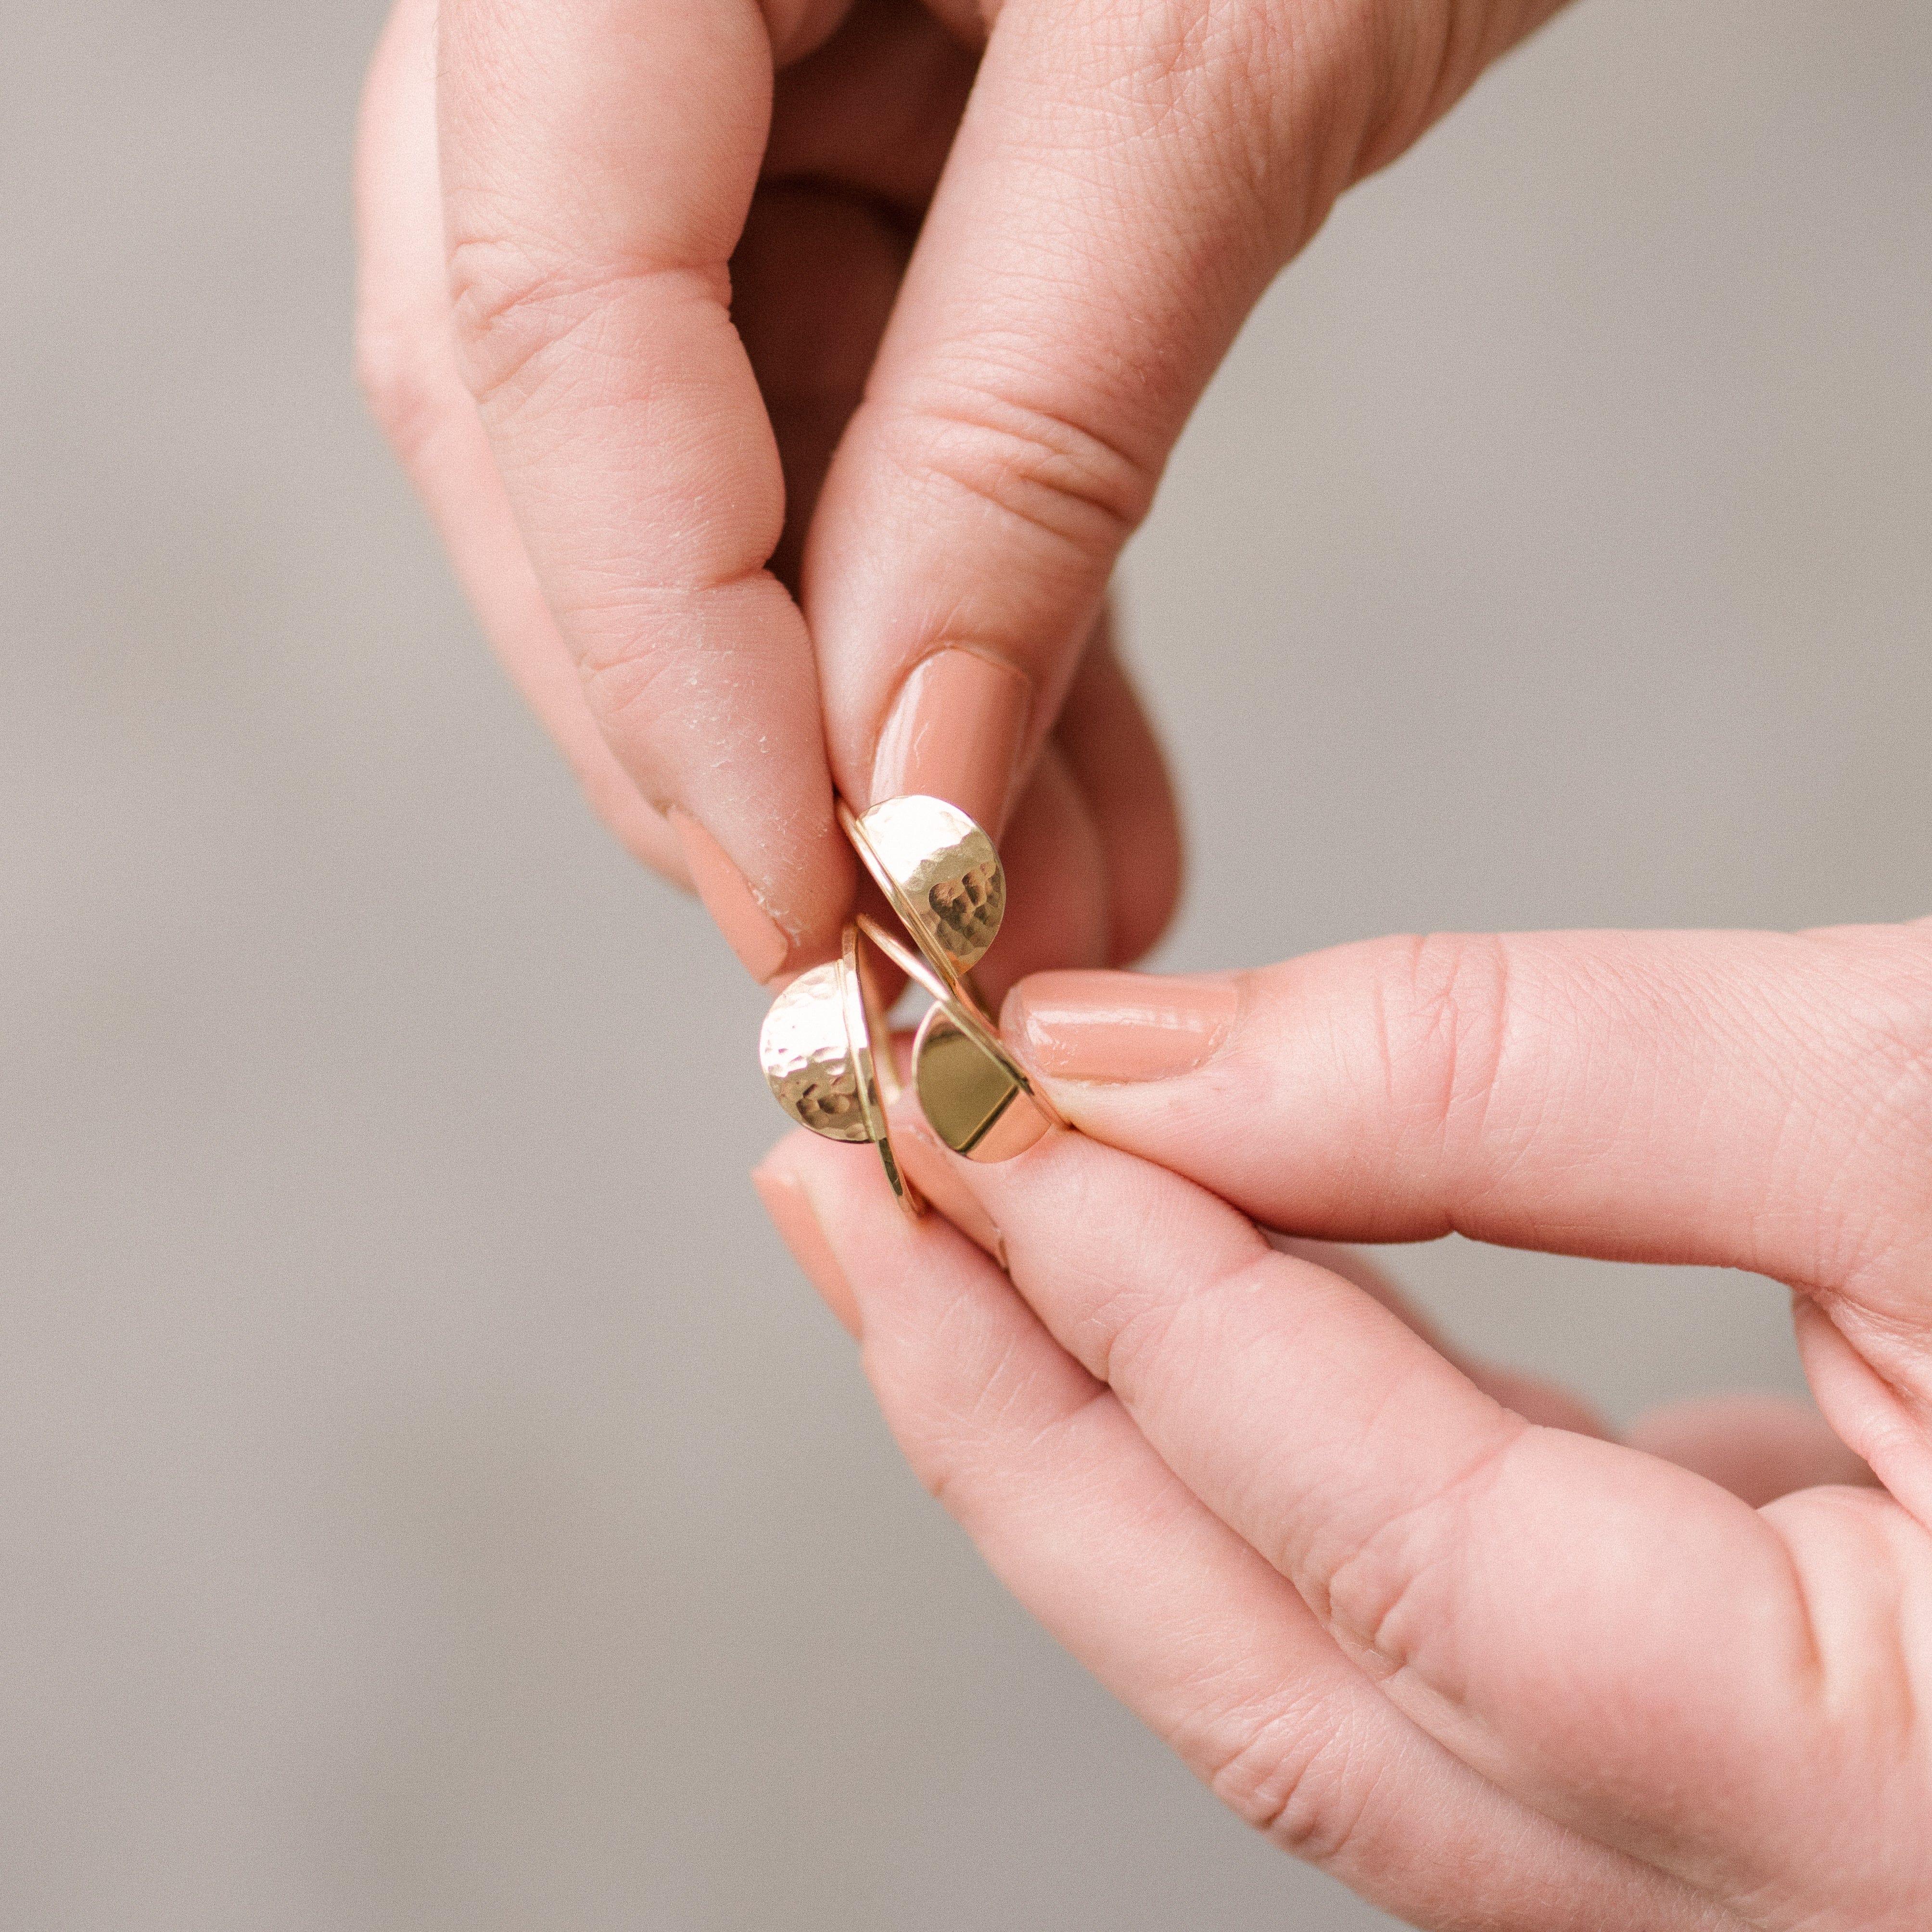 Half Moon Ring - Nolia Jewelry - Meaningful + Sustainably Handcrafted Jewelry